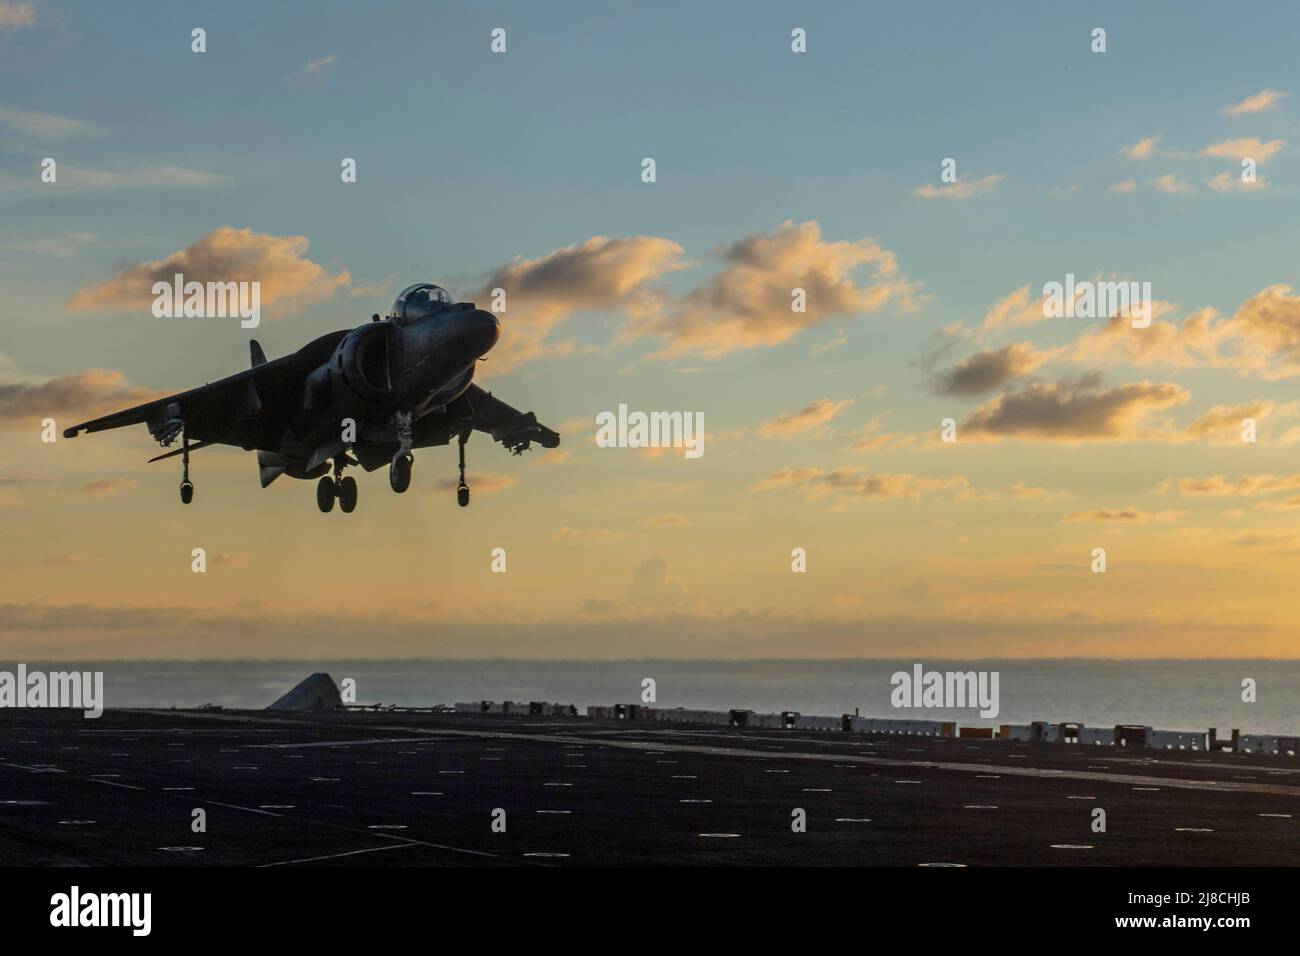 A U.S. Marine Corps AV-8B Harrier II, attached to the Marine Medium Tiltrotor Squadron 163, performs a vertical landing on the flight deck of the Wasp-class amphibious assault ship USS Boxer at sunset, October 3, 2019 on the South China Sea. Stock Photo